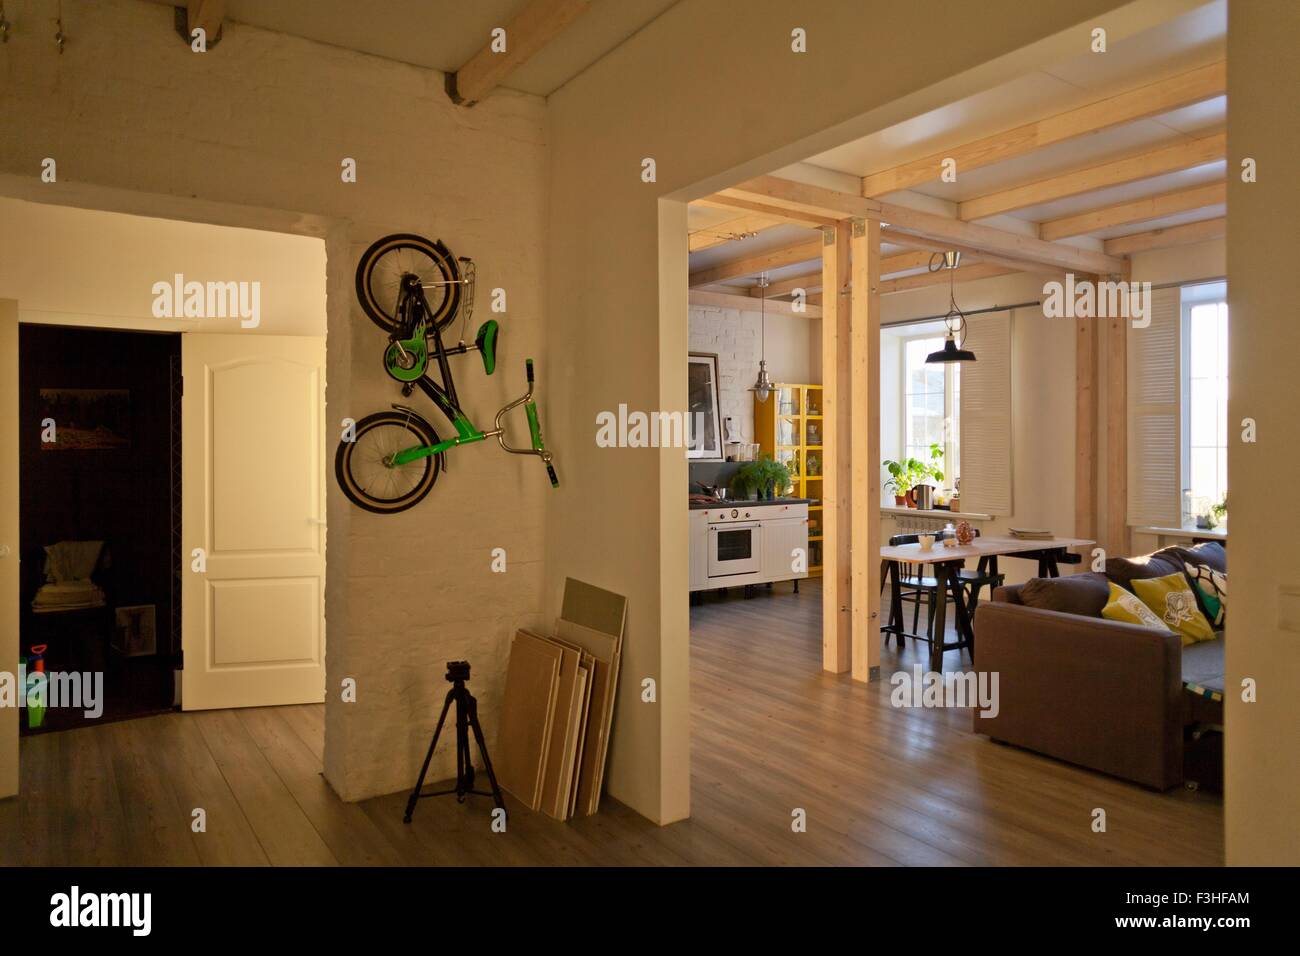 View of storage room, kitchen, dining area, couch and bicycle on wall Stock Photo